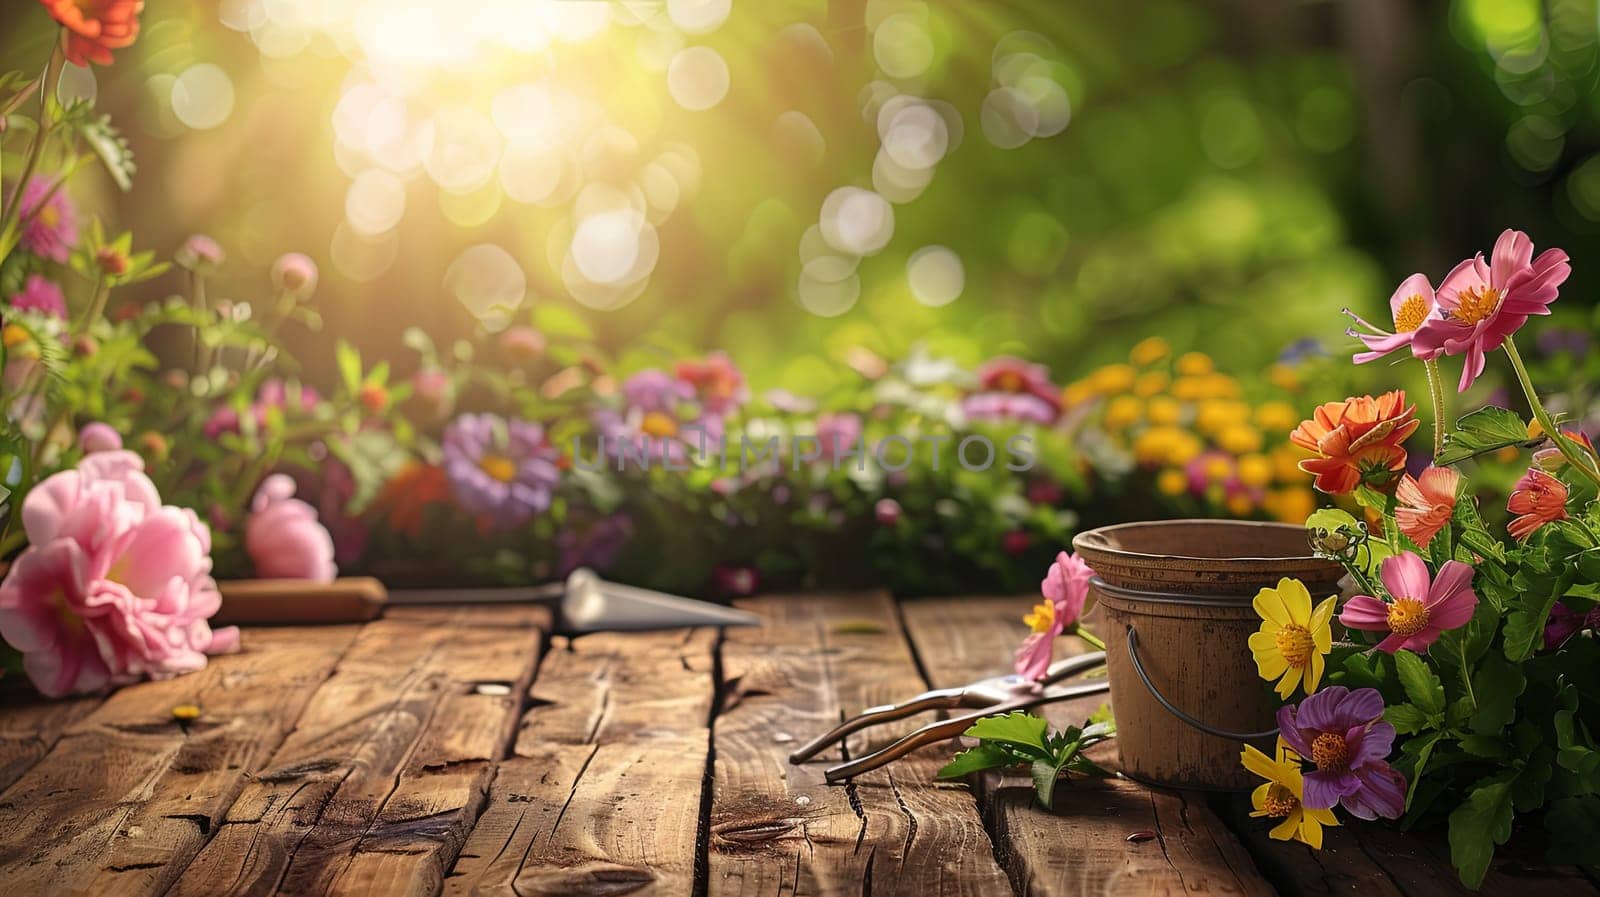 Colorful flowers are arranged on a wooden table, mixed with garden tools and surrounded by a blurred natural background.